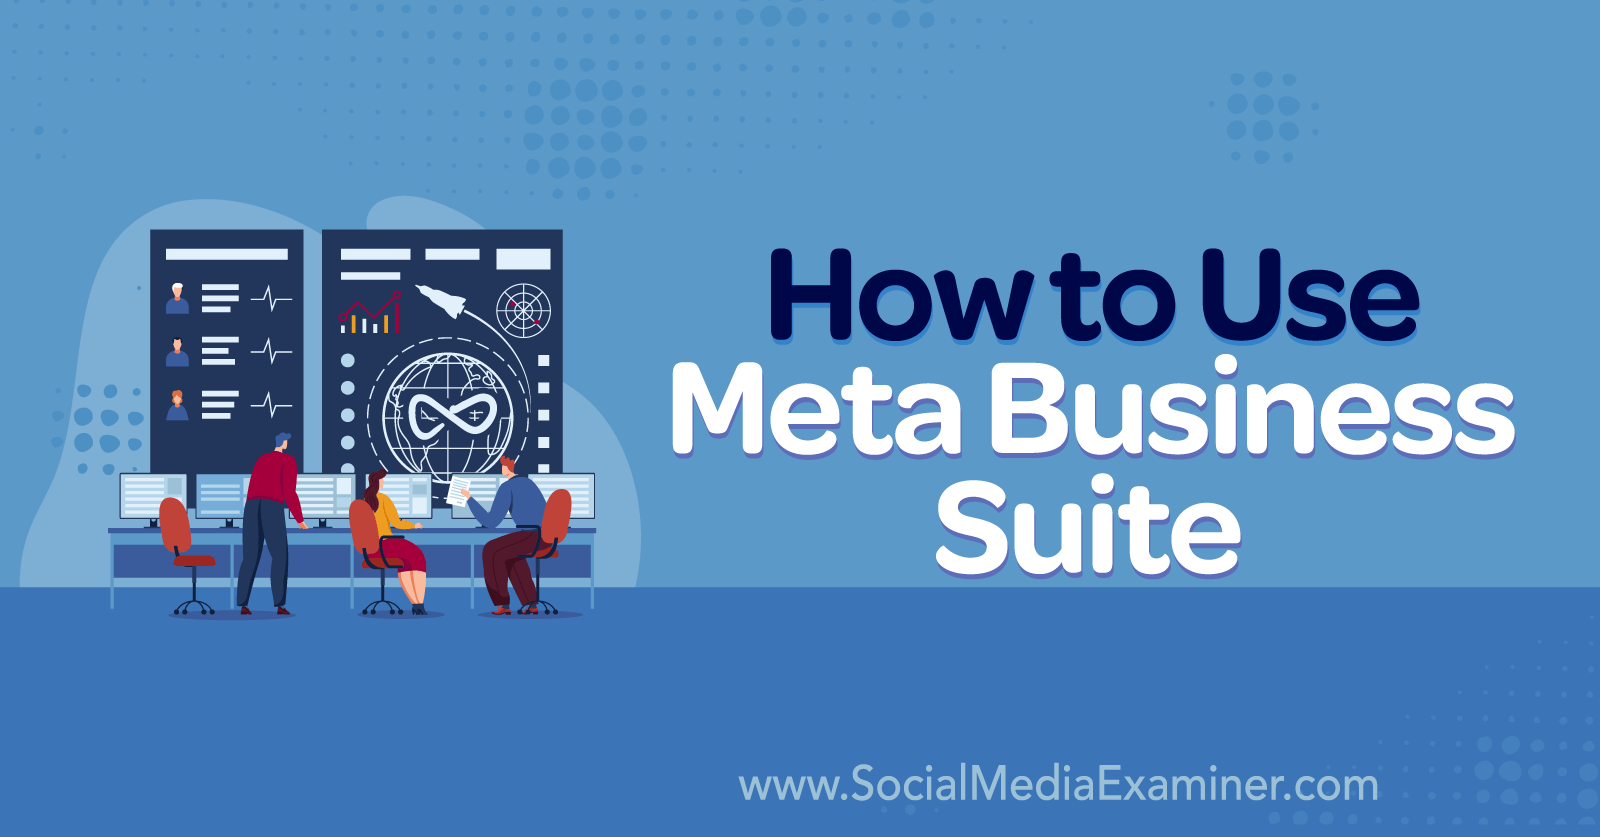 How to Use Meta Business Suite-Social Media Examiner